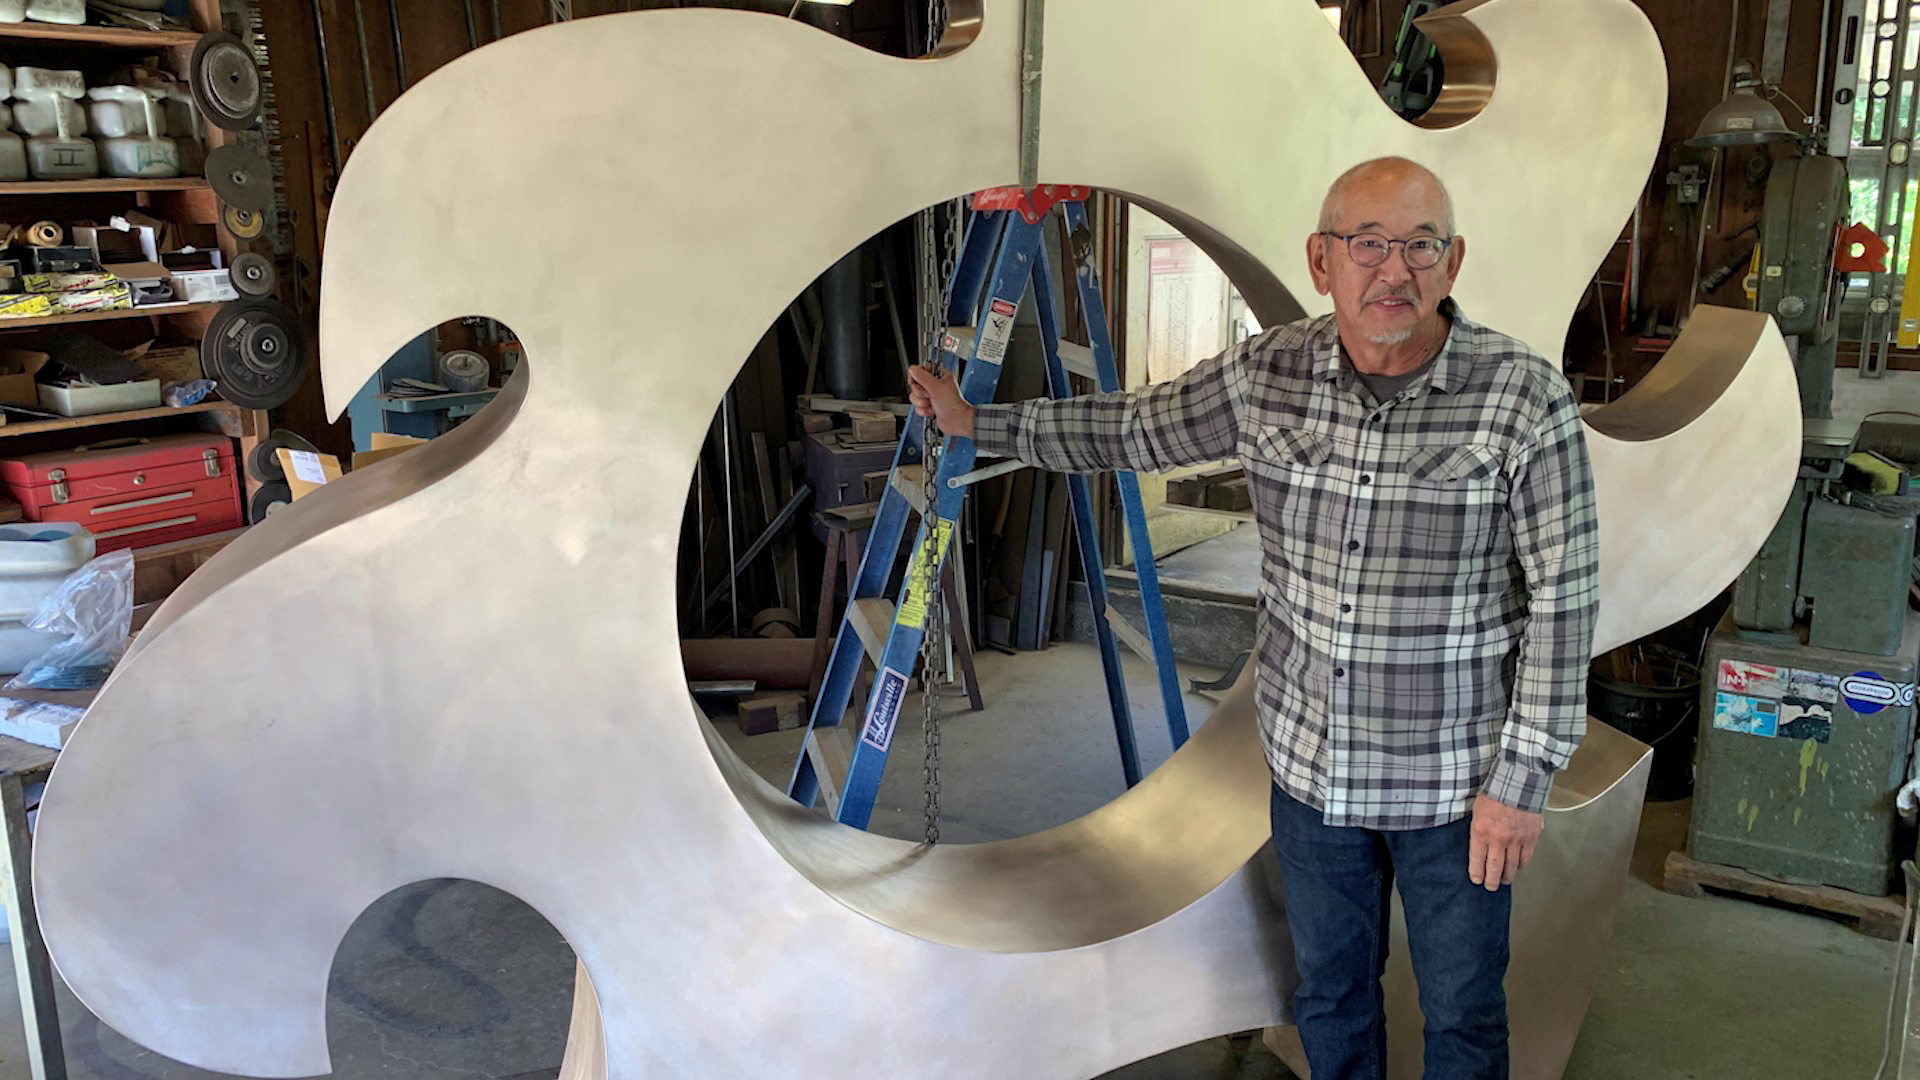 Gerard 'Gerry' Tsutakawa, sculptor of T-Mobile Park's 'The Mitt', marks 40 years of art with new sculpture for Climate Pledge Arena. #k5evening